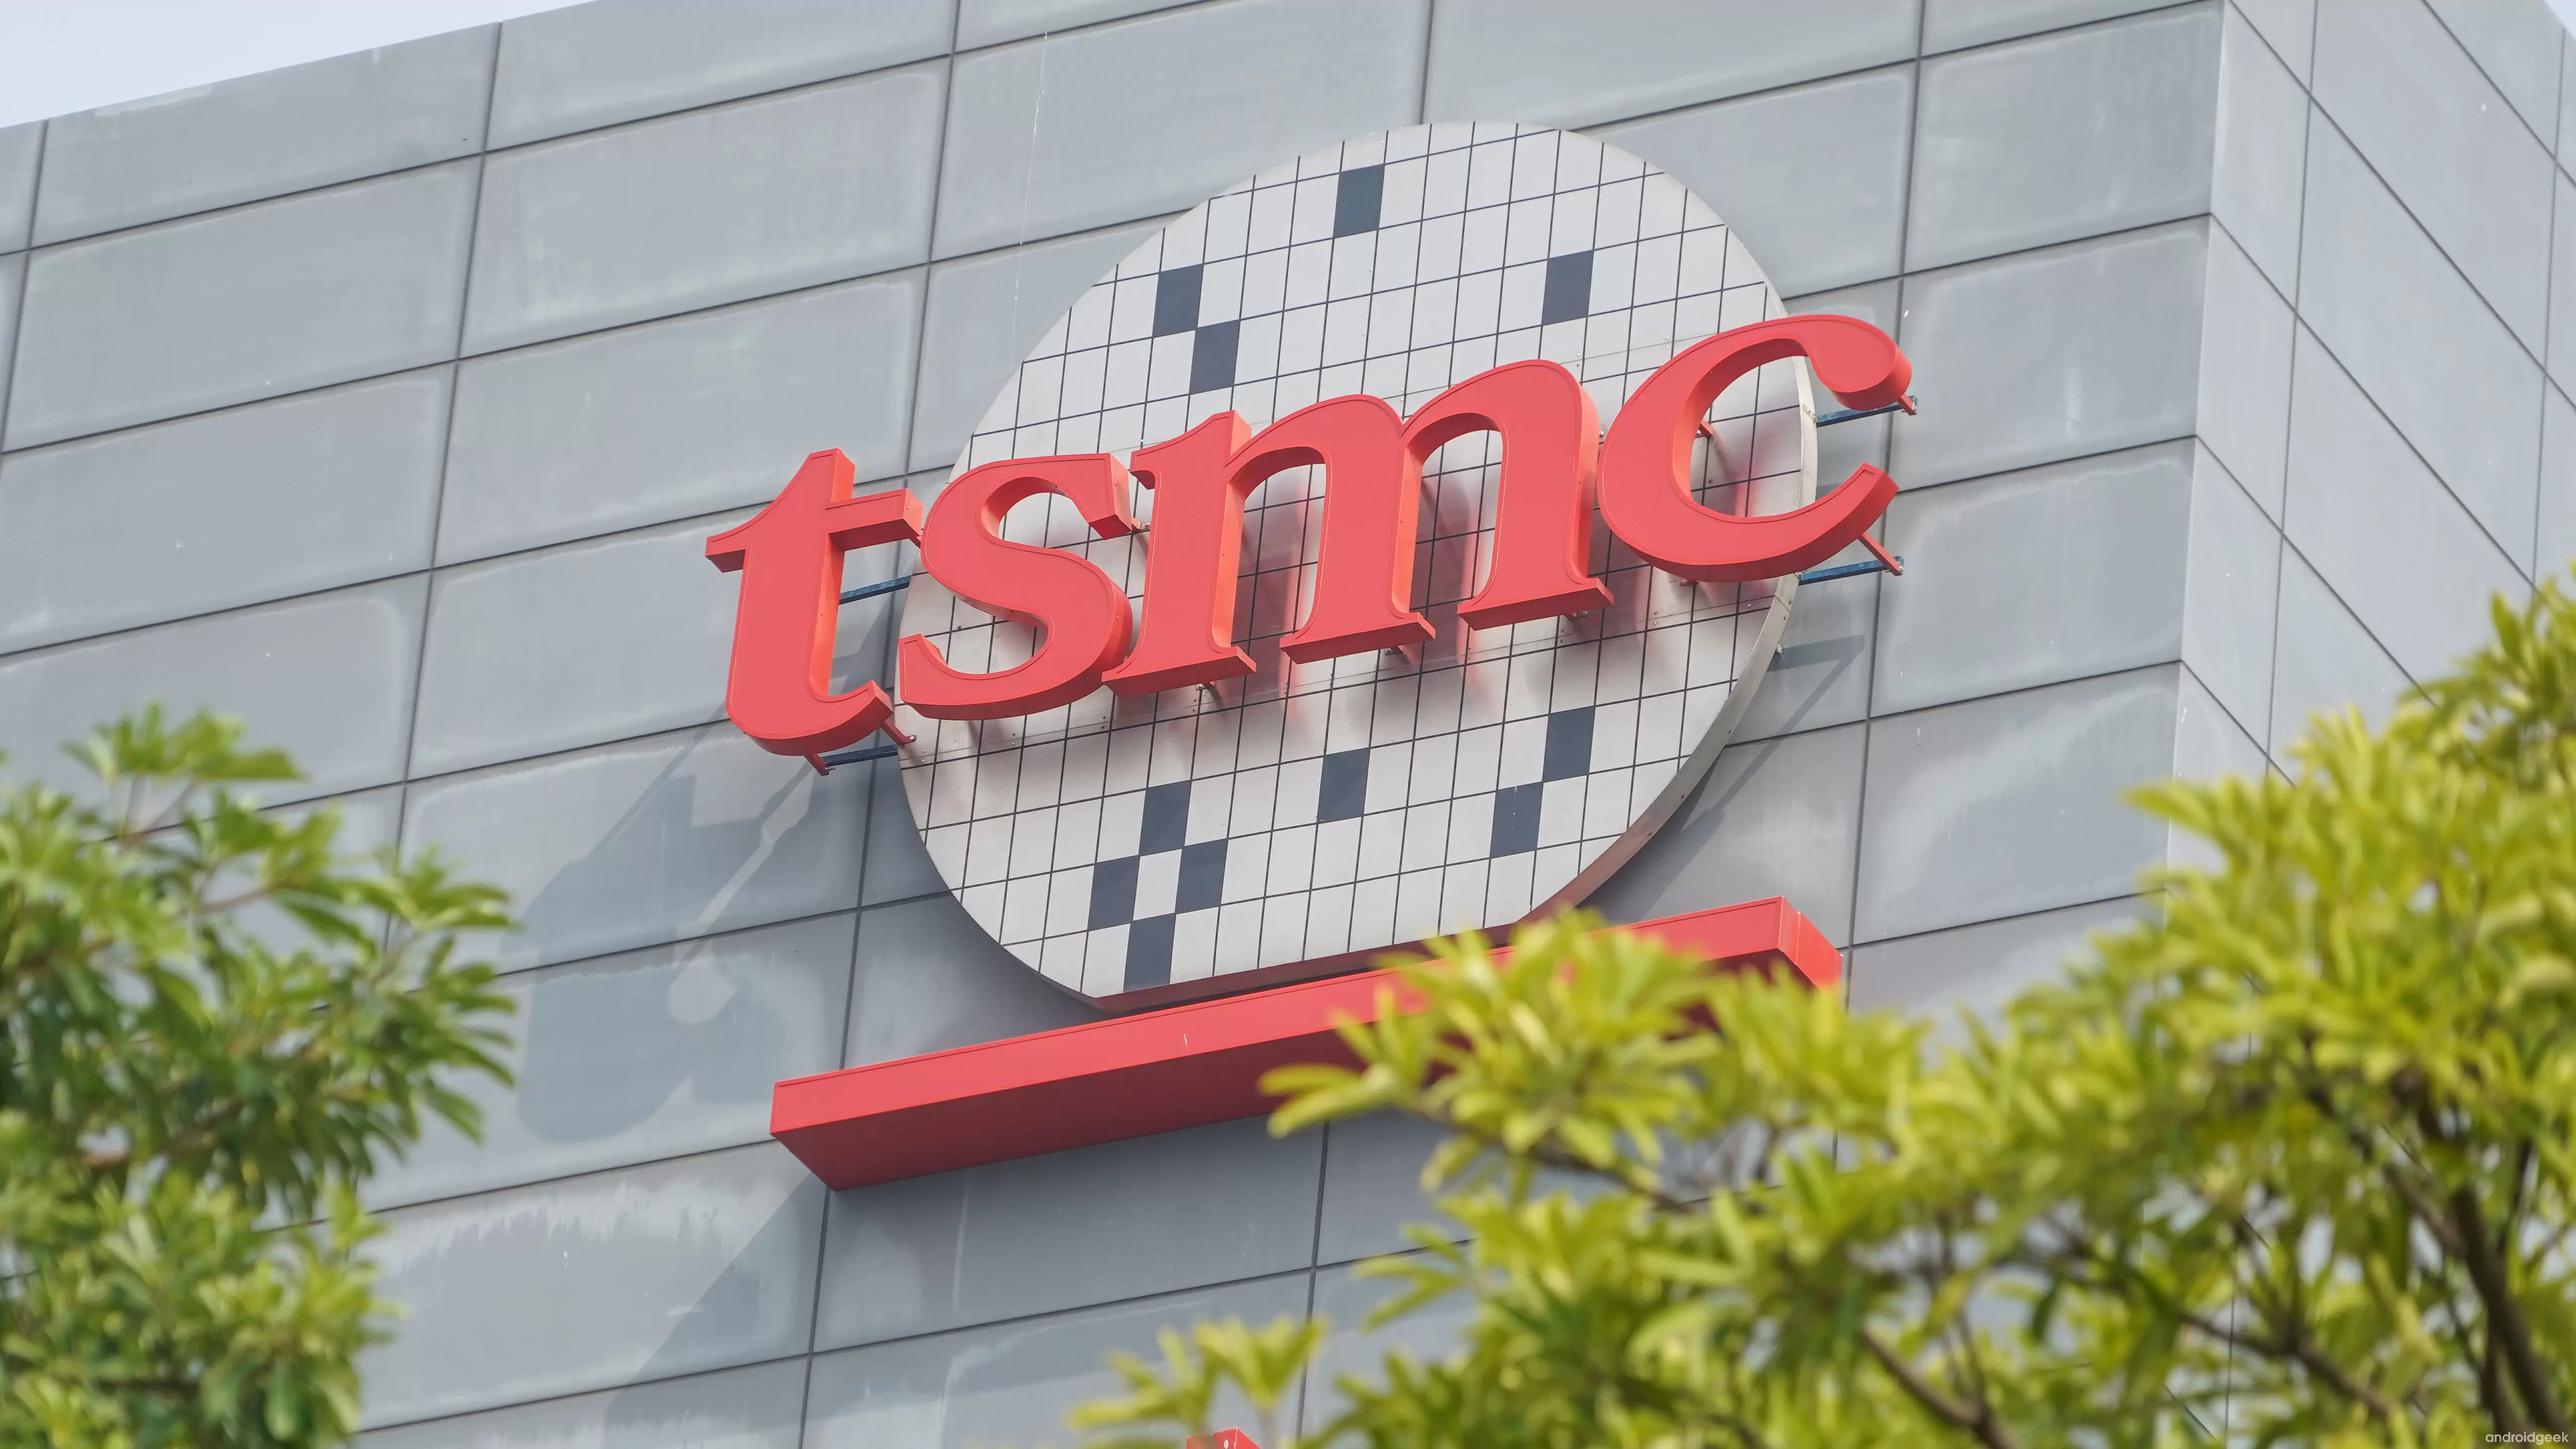 Apple and Intel will be the first with TSMC 3nm chipsets in 2022